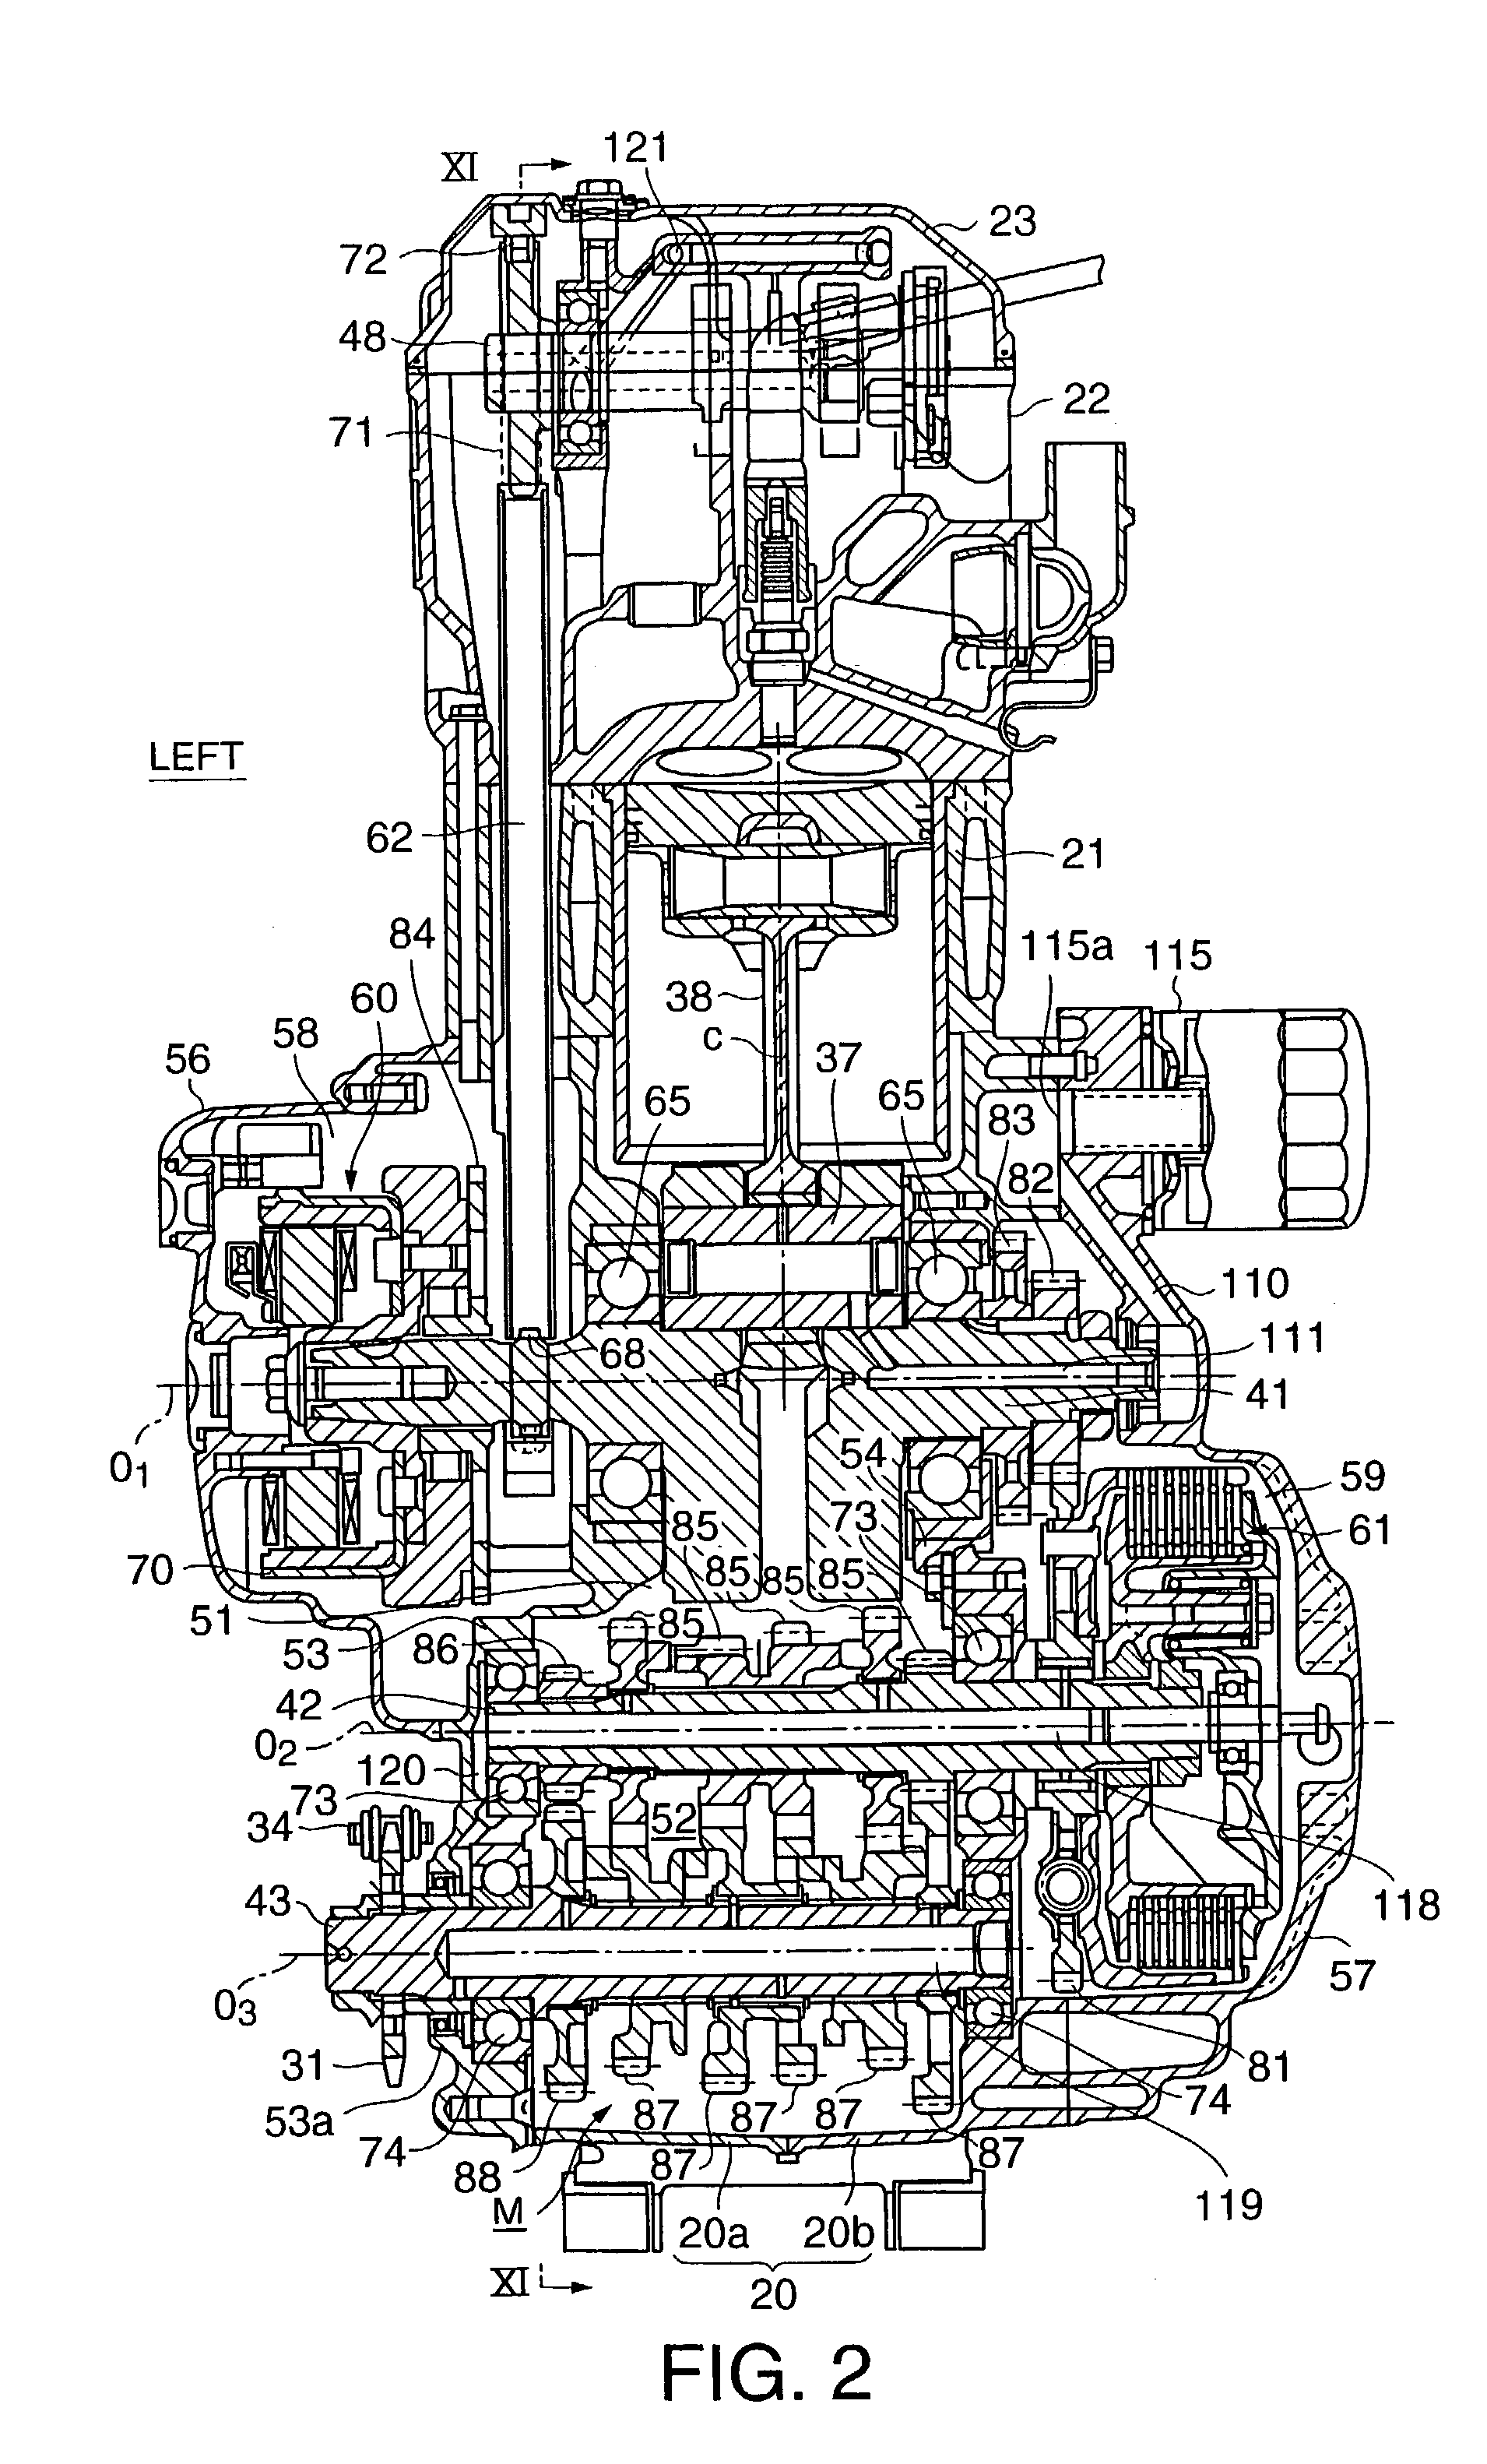 Dry-sump lubrication type four-stroke cycle engine